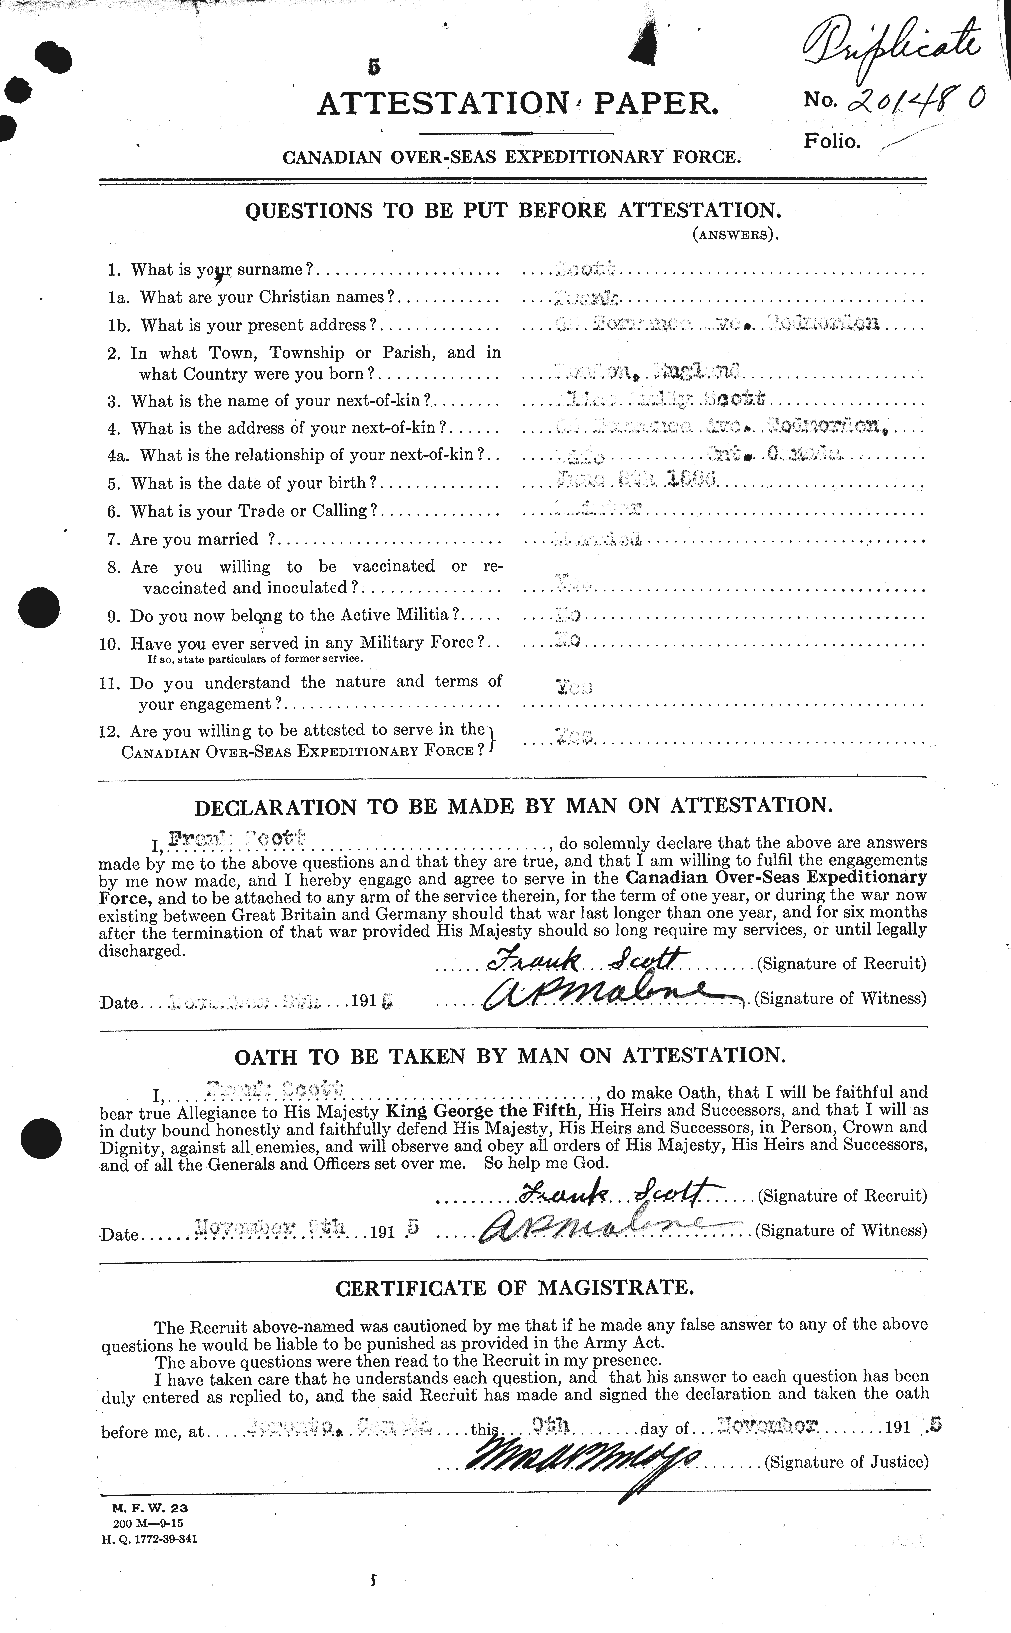 Personnel Records of the First World War - CEF 084712a